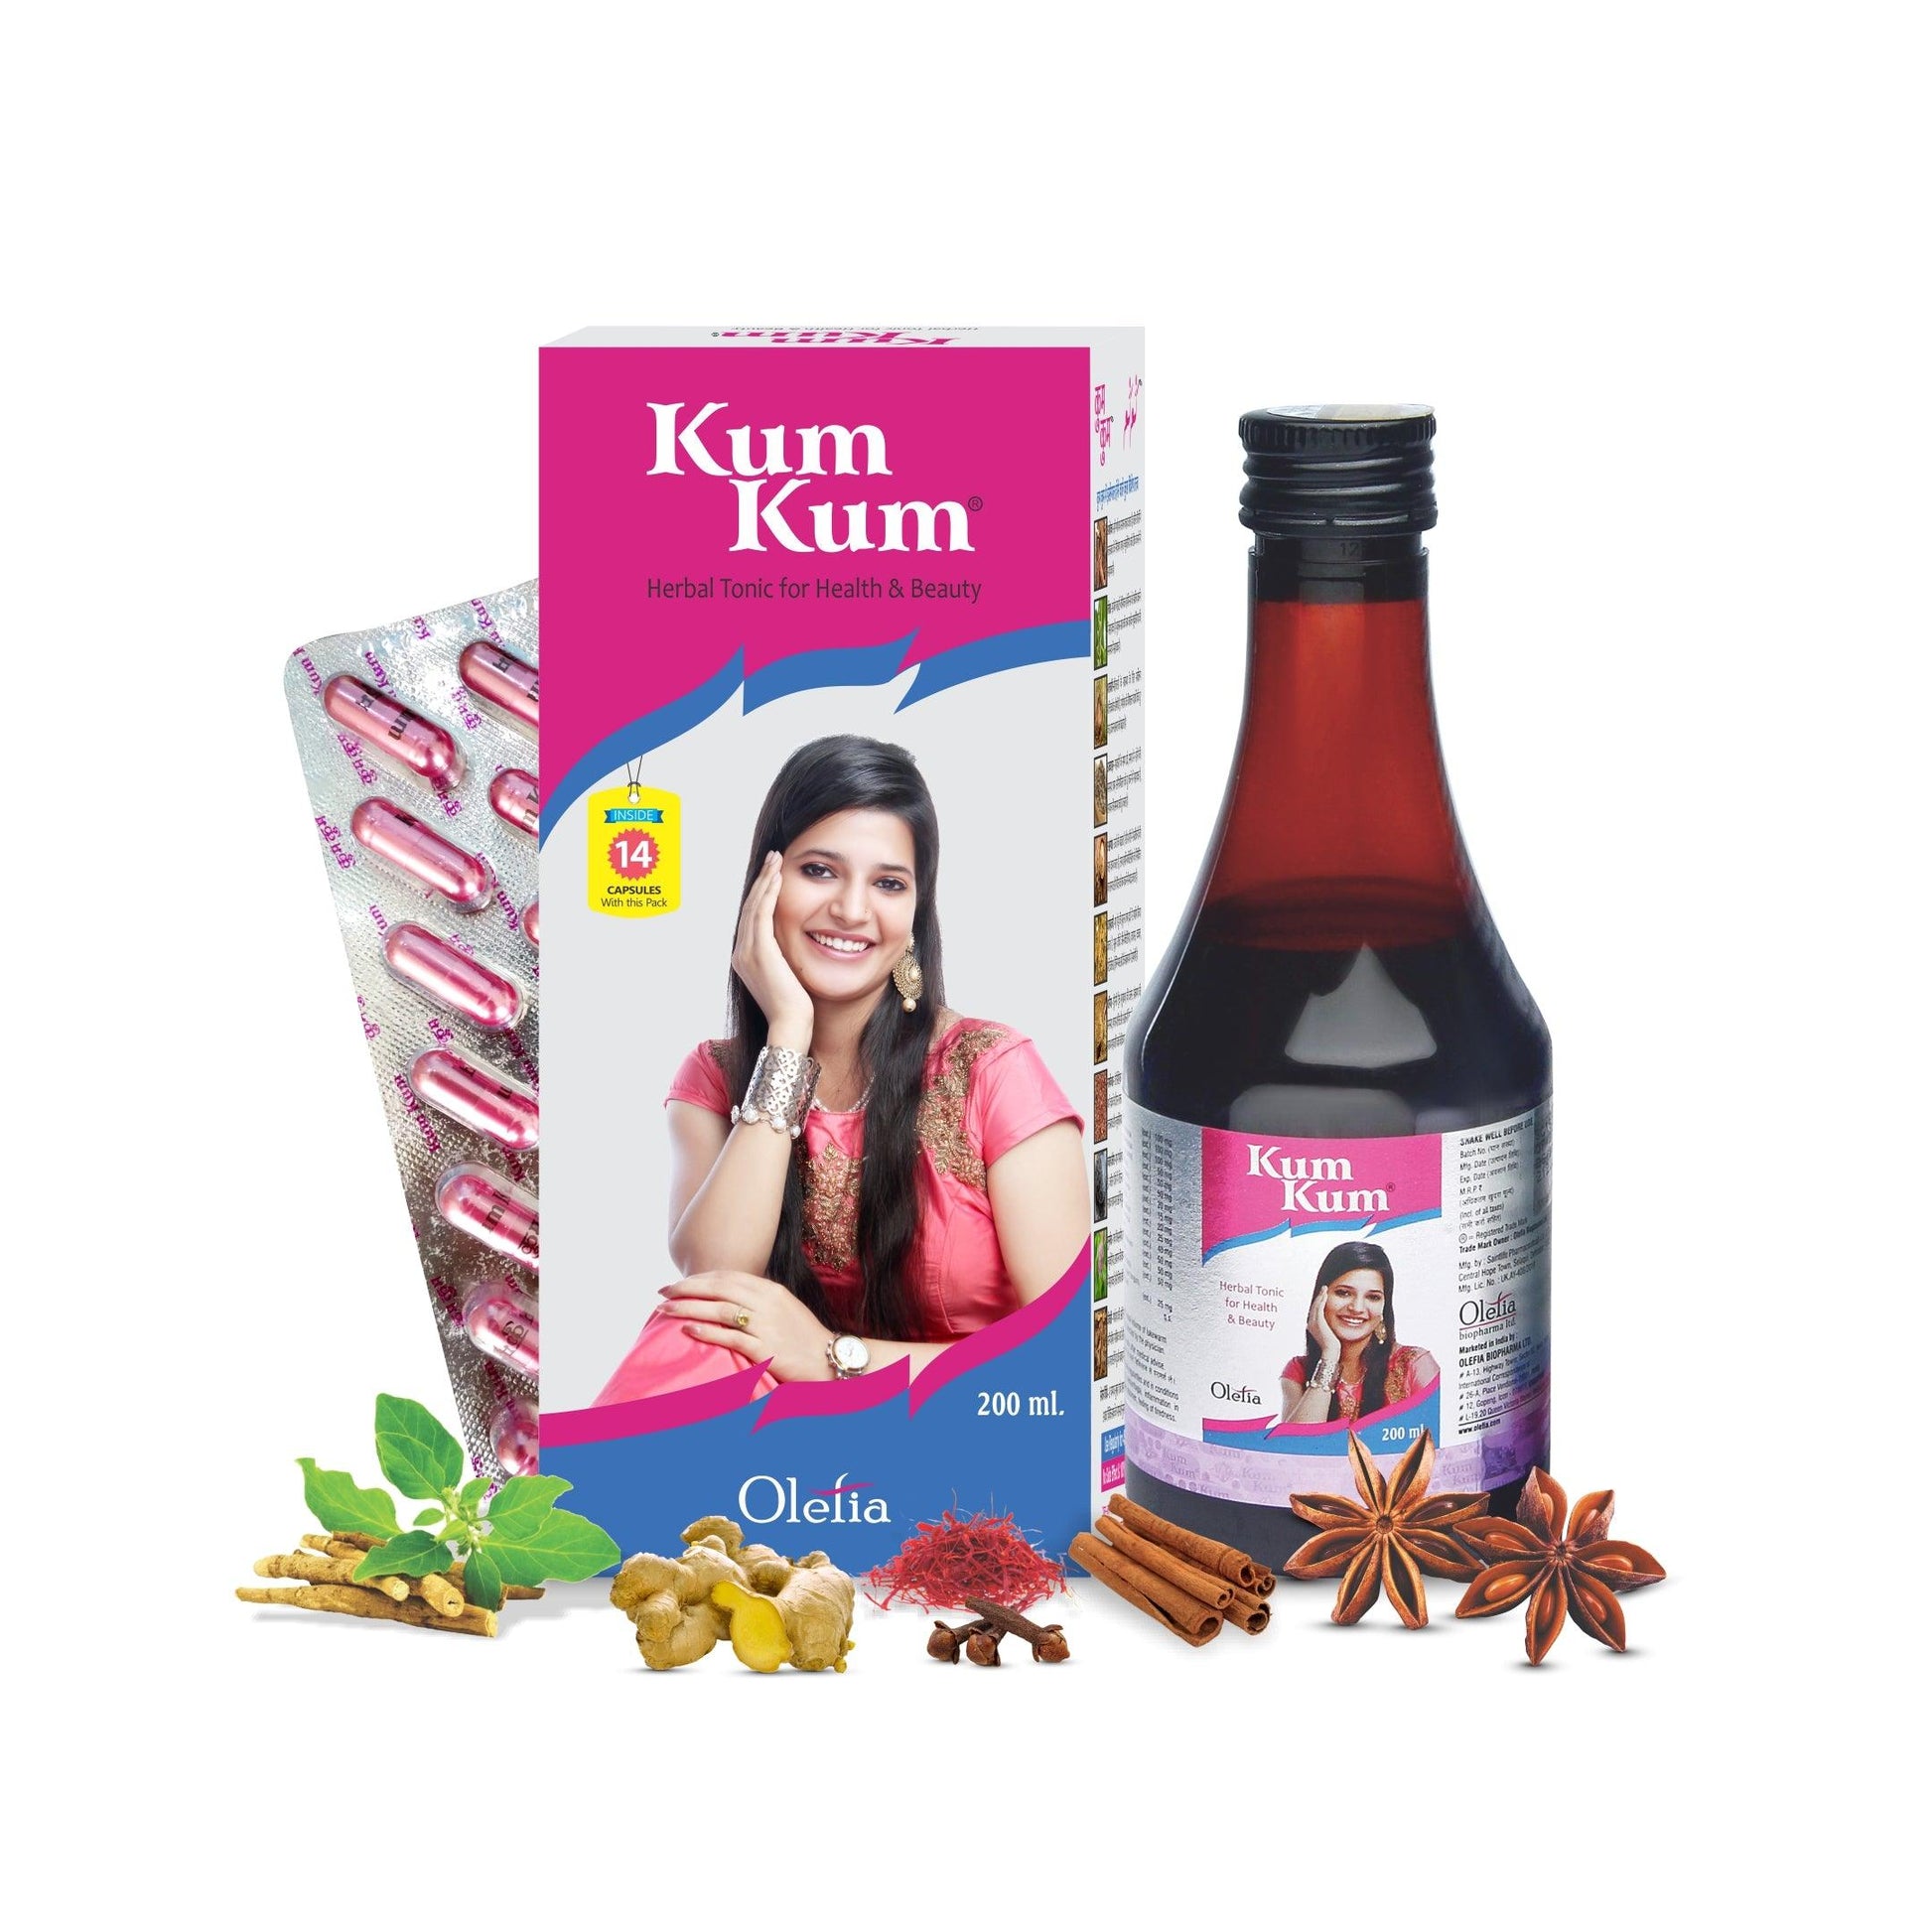 KumKum Herbal Syrup for Women's Internal Problems, Health and Beauty (Pack of 3) - Olefia Biopharma Limited